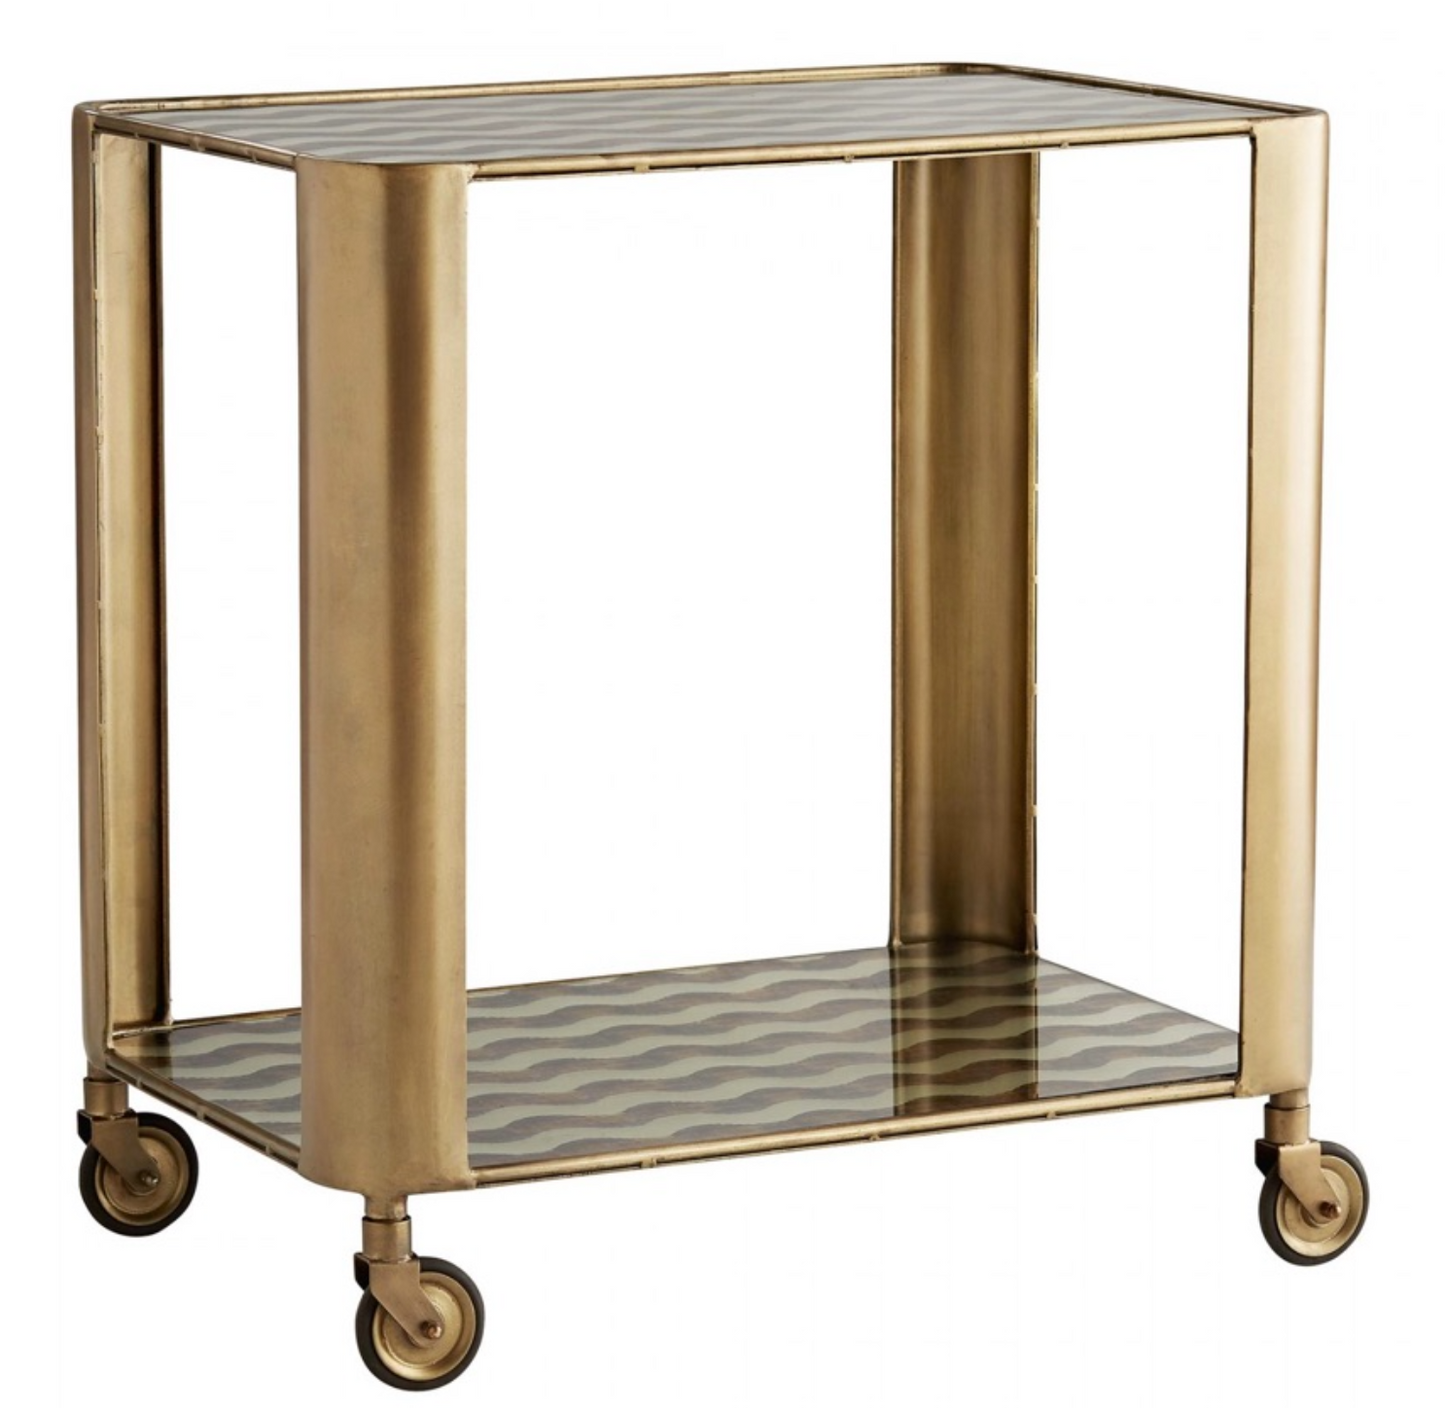 Antique brass finish bar cart with wheels, 2 tiers of wavy patterned antique mirrored glass